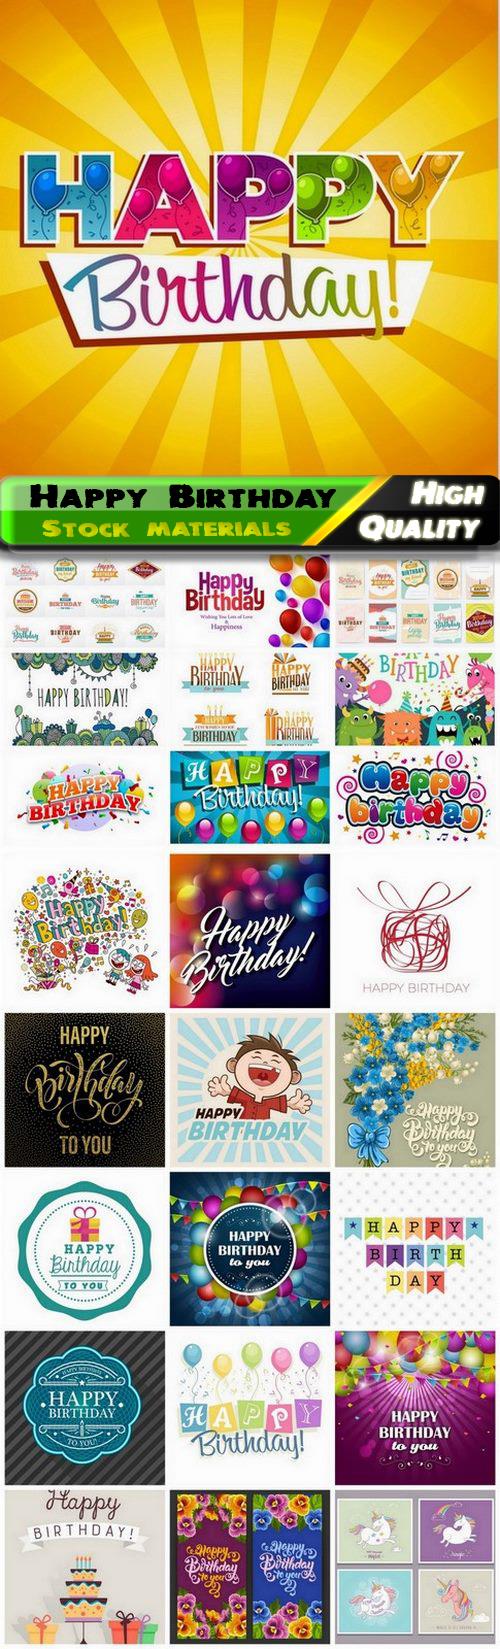 Happy Birthday holiday card with balloons sweets confetti - 25 Eps